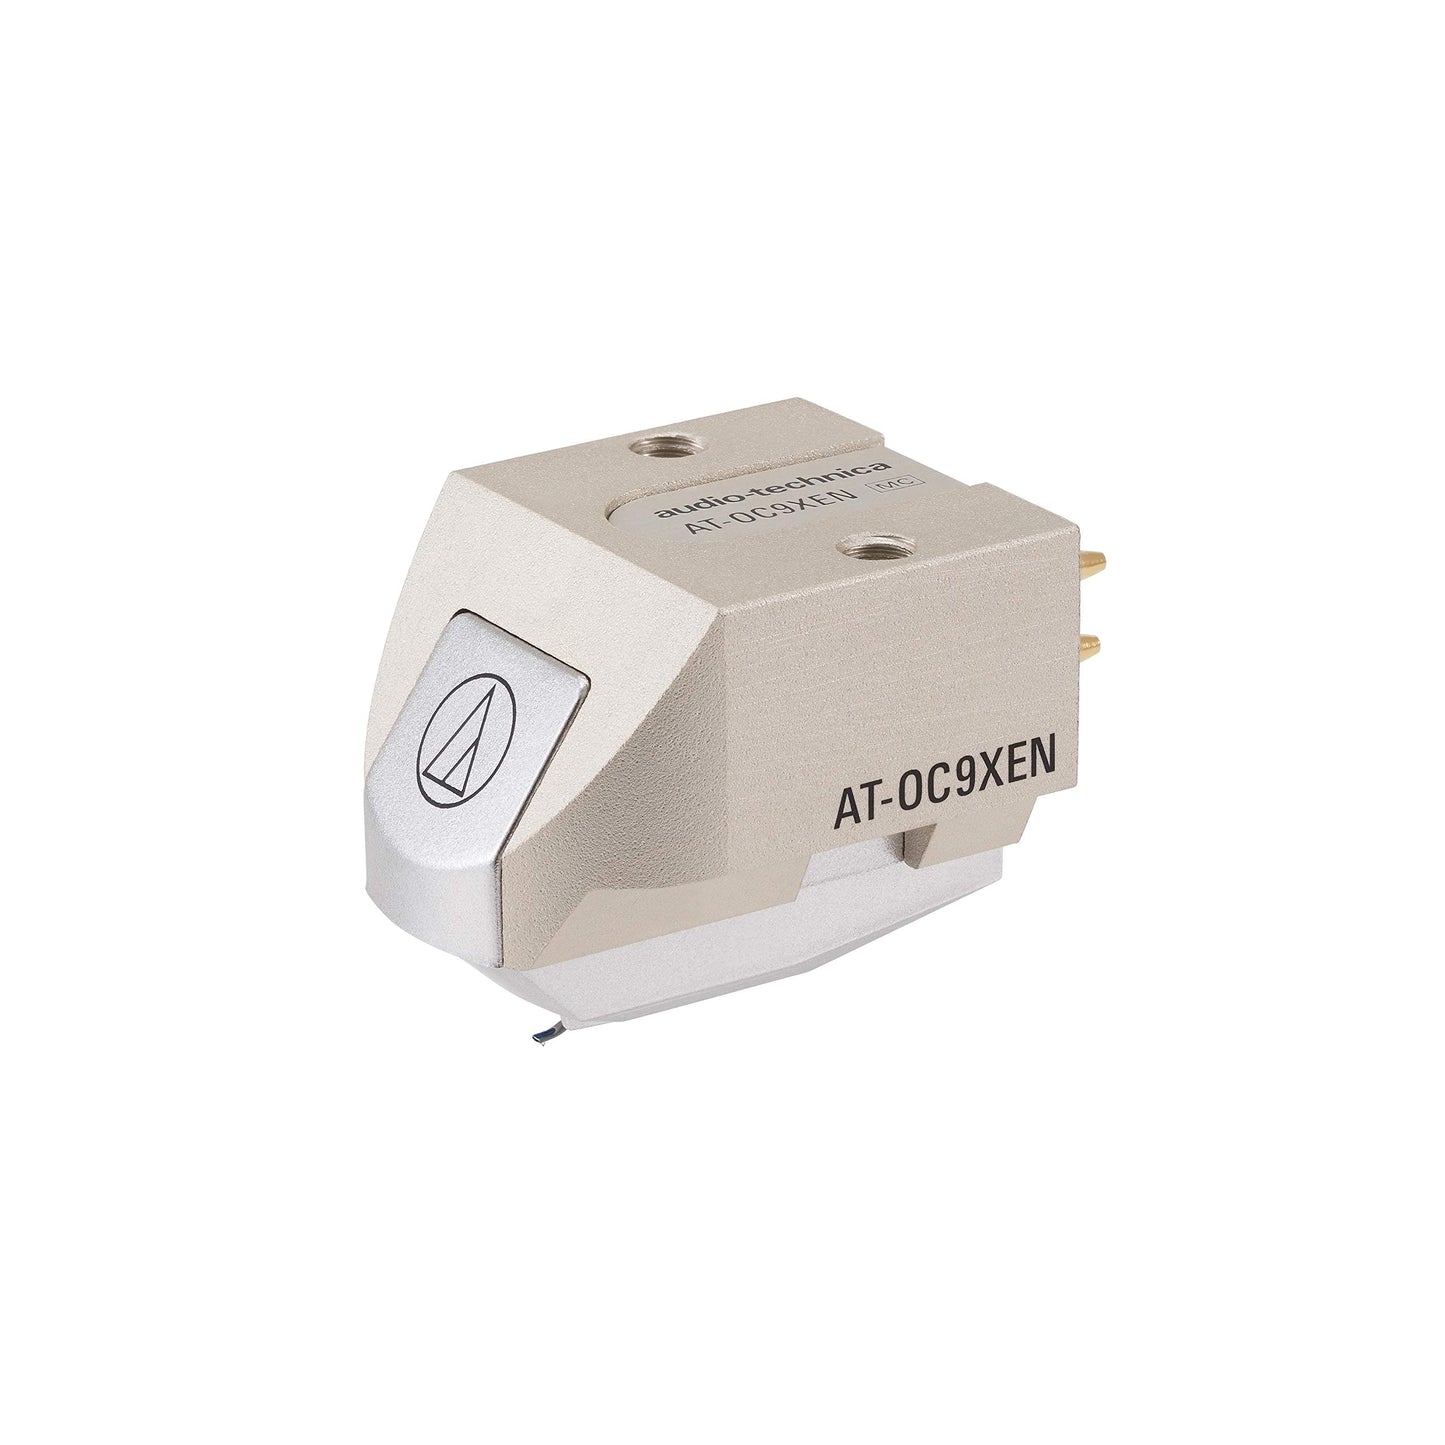 Audio-Technica AT-OC9XEN Dual Moving Coil Cartridge with Nude Elliptical Stylus